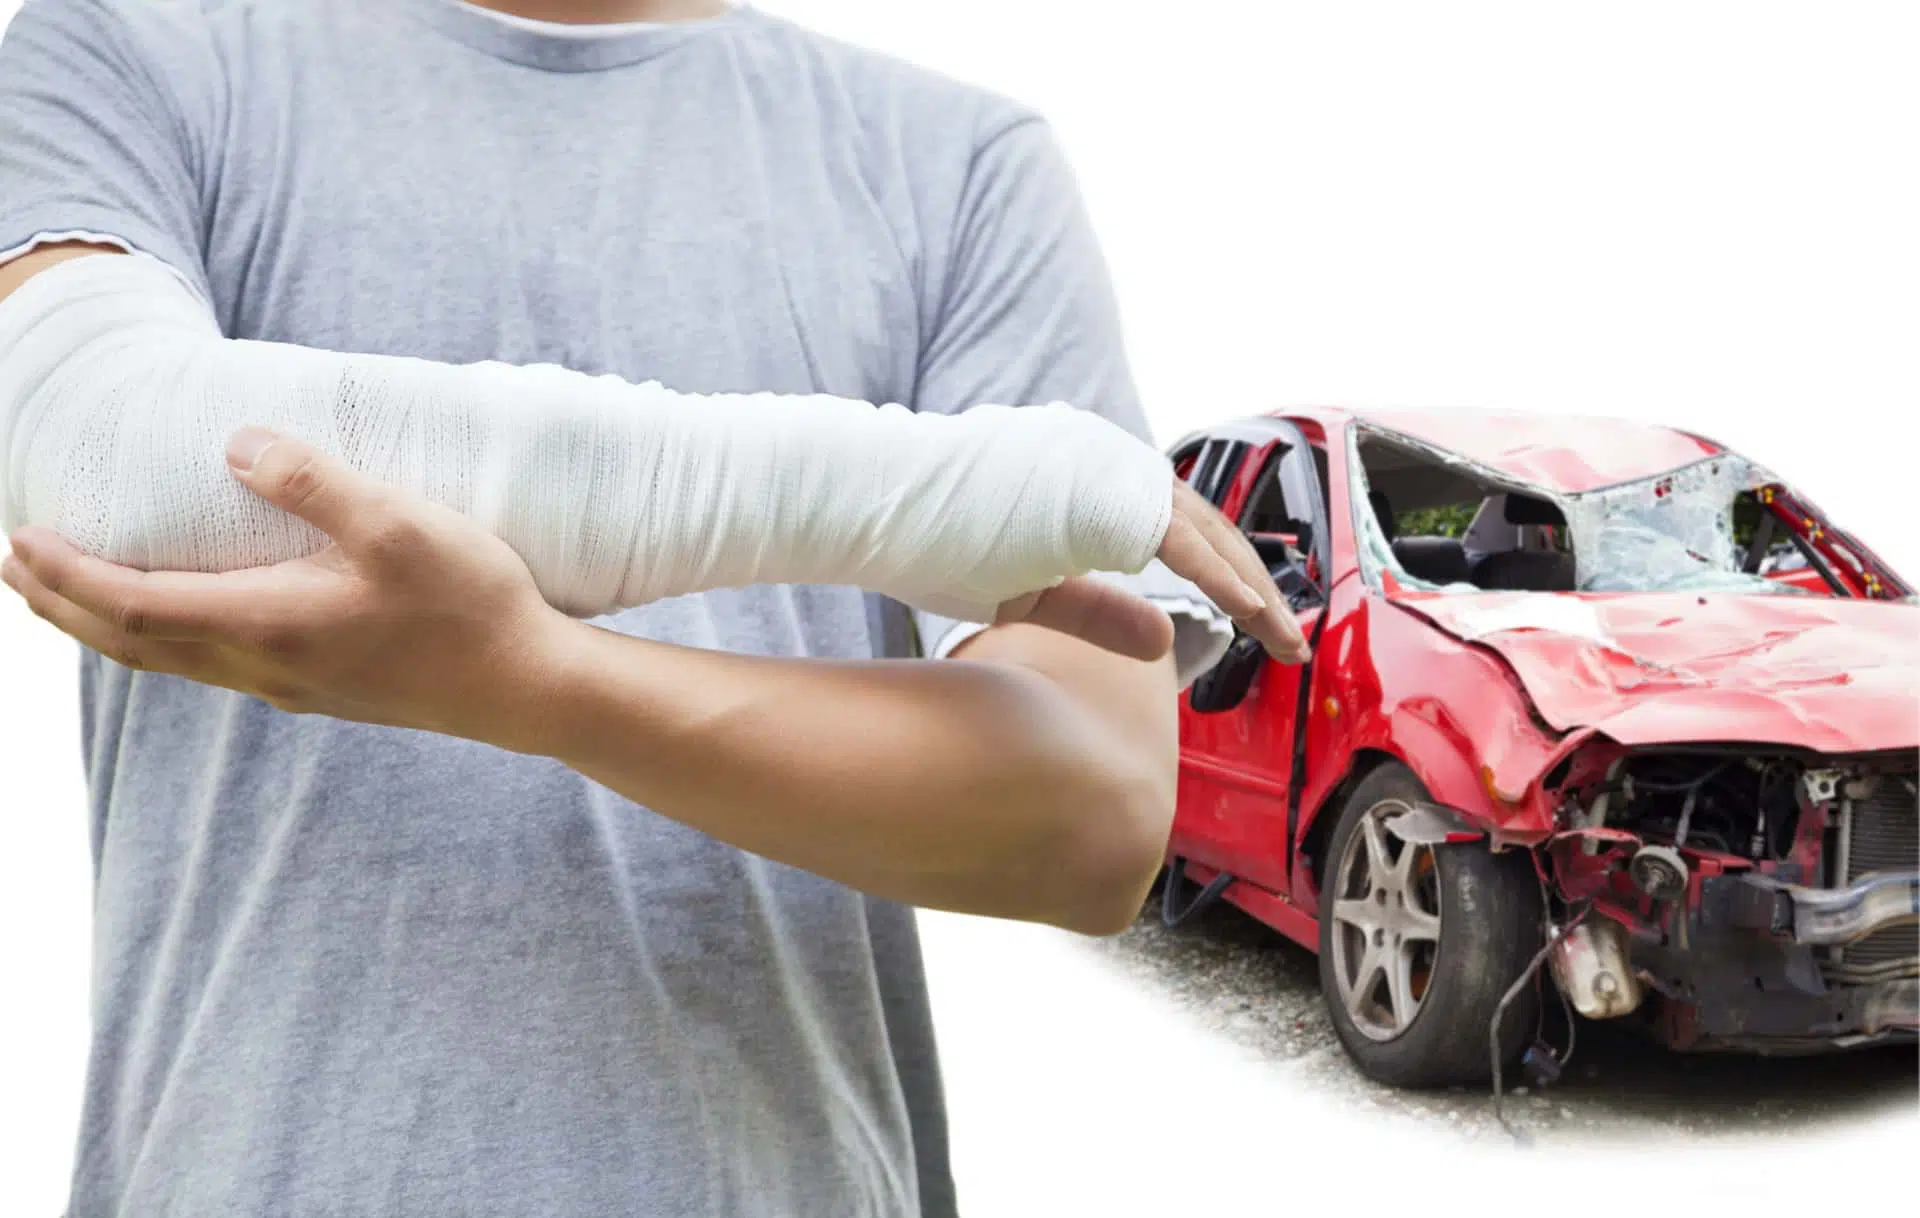 Close up of a man's casted arm with his totaled vehicle in the background